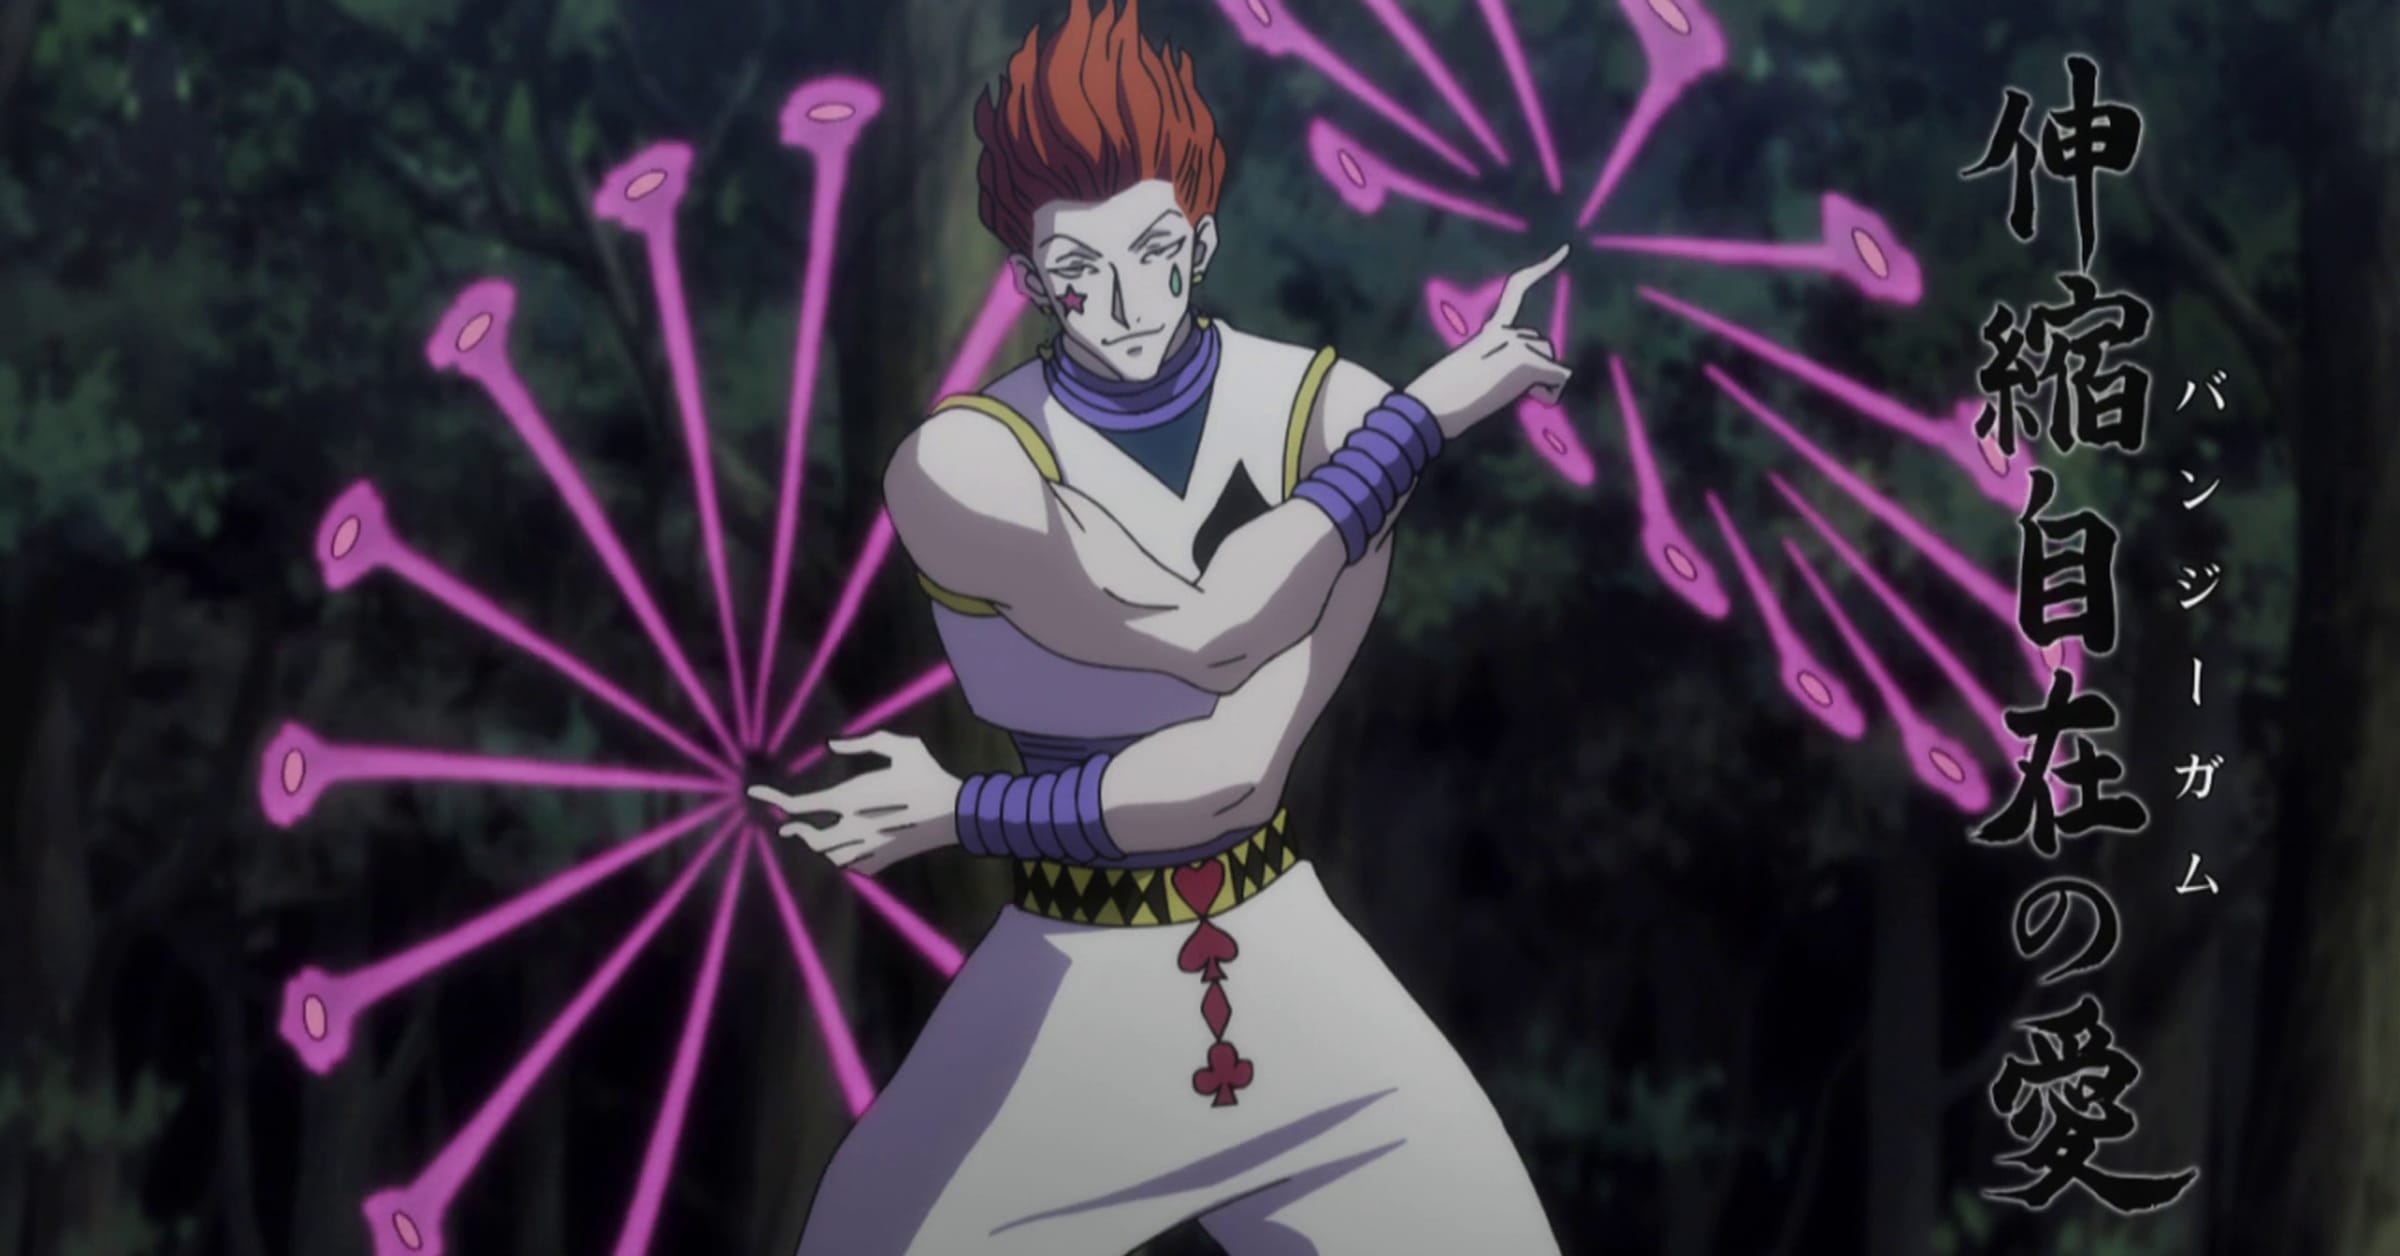 Creating A Nen Ability For Ging Freecss